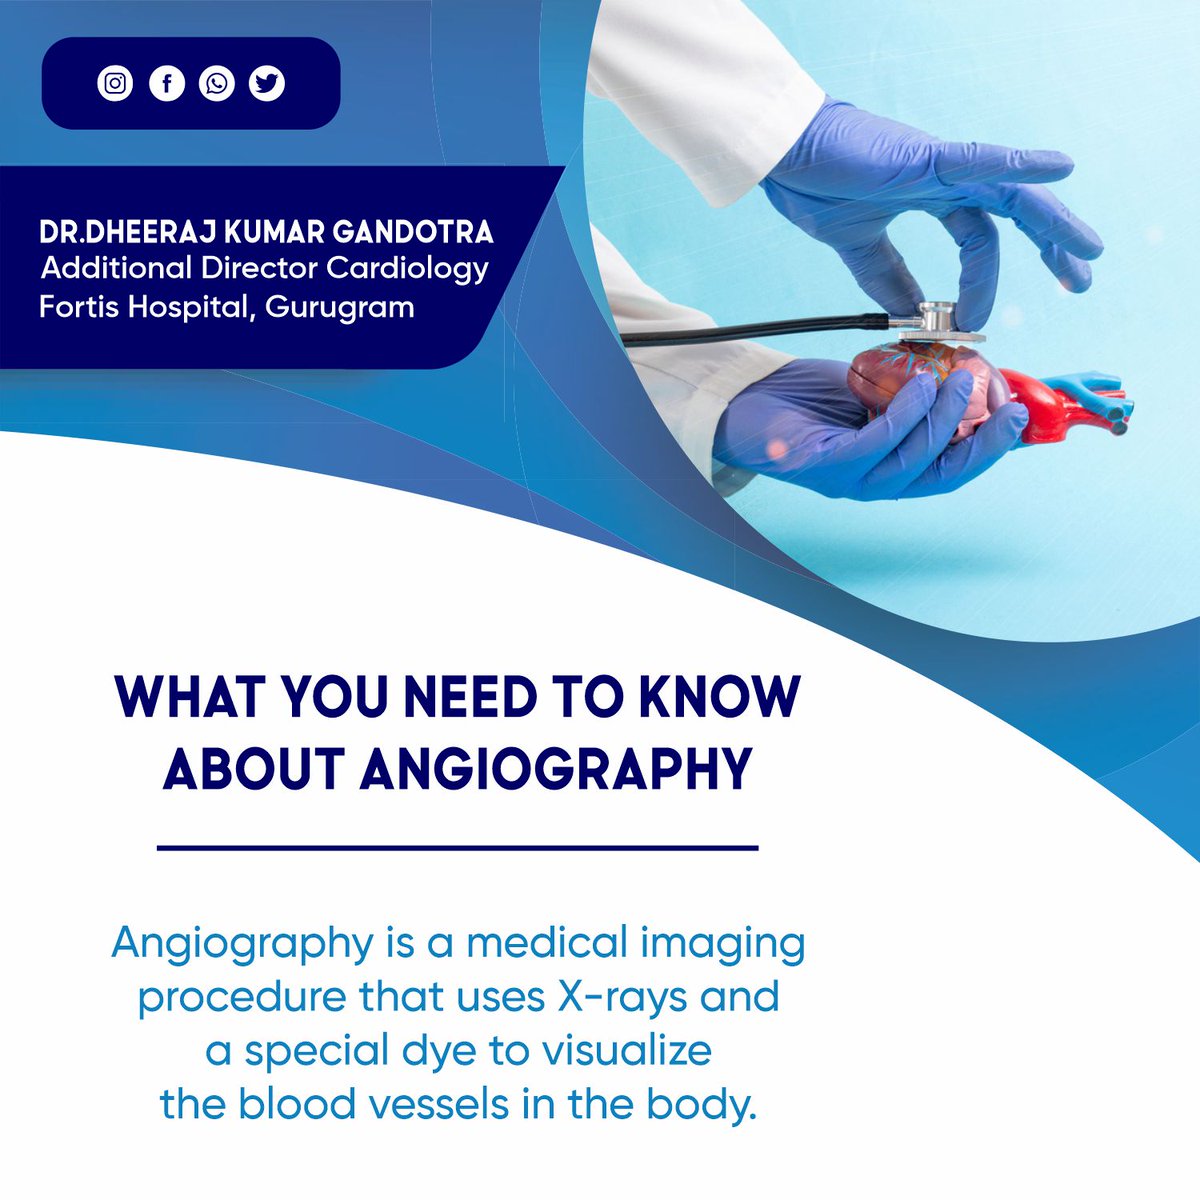 Angiography is a medical imaging procedure that uses an X-ray and a special dye to visualize the blood vessels in the body.

#heartdoctor #cardiacdiagnosis #cardiology #cardiologist #cardiaccare #angiography #heartspecialist